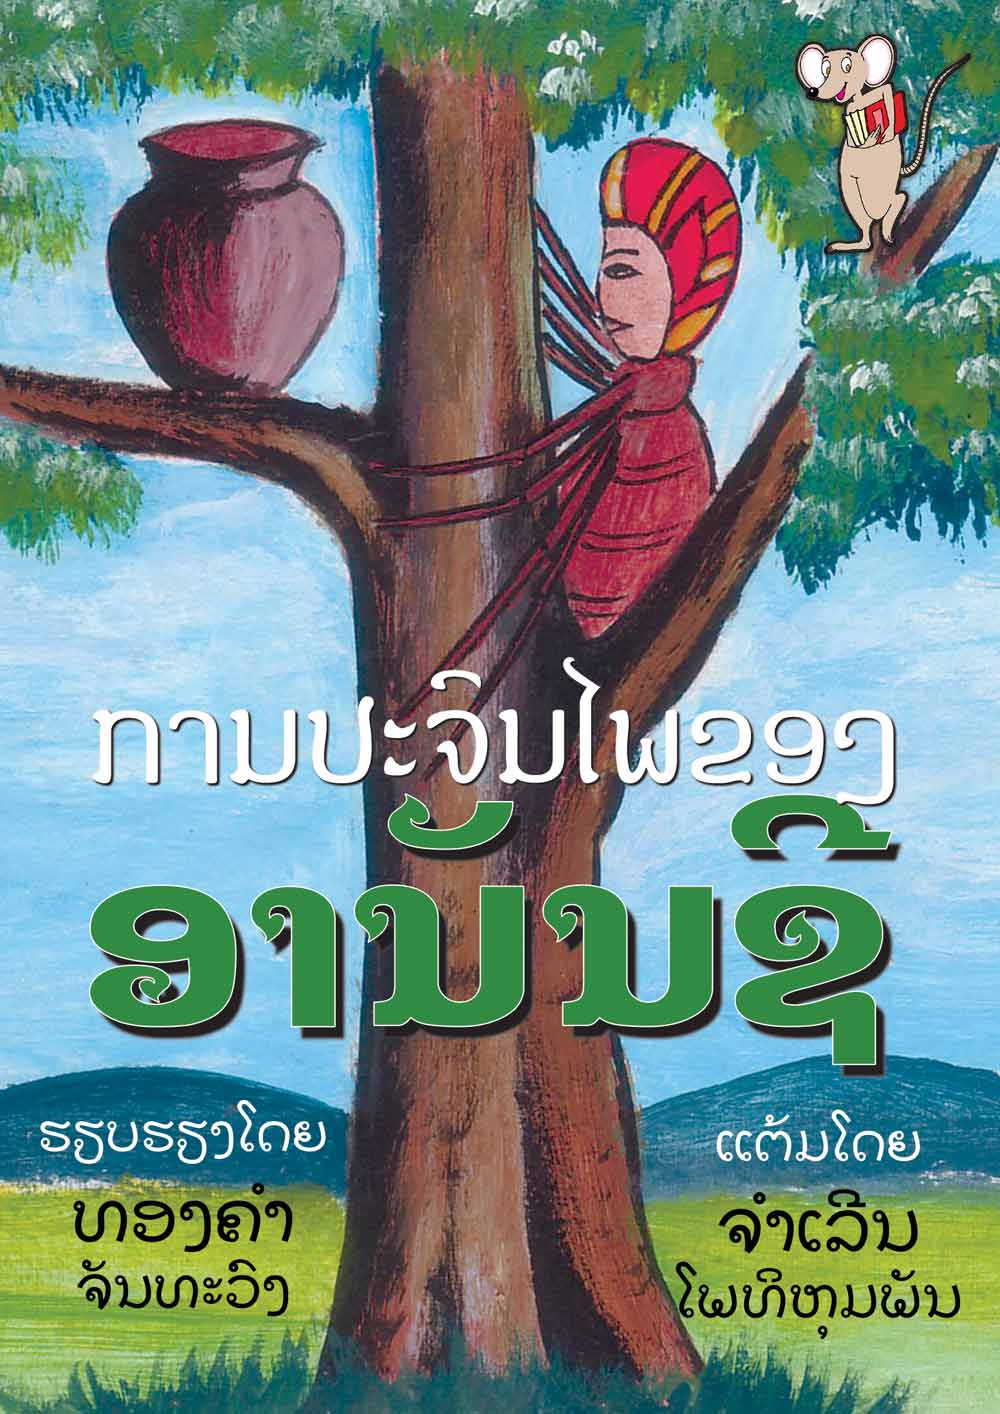 The Adventures of Anansi large book cover, published in Lao language